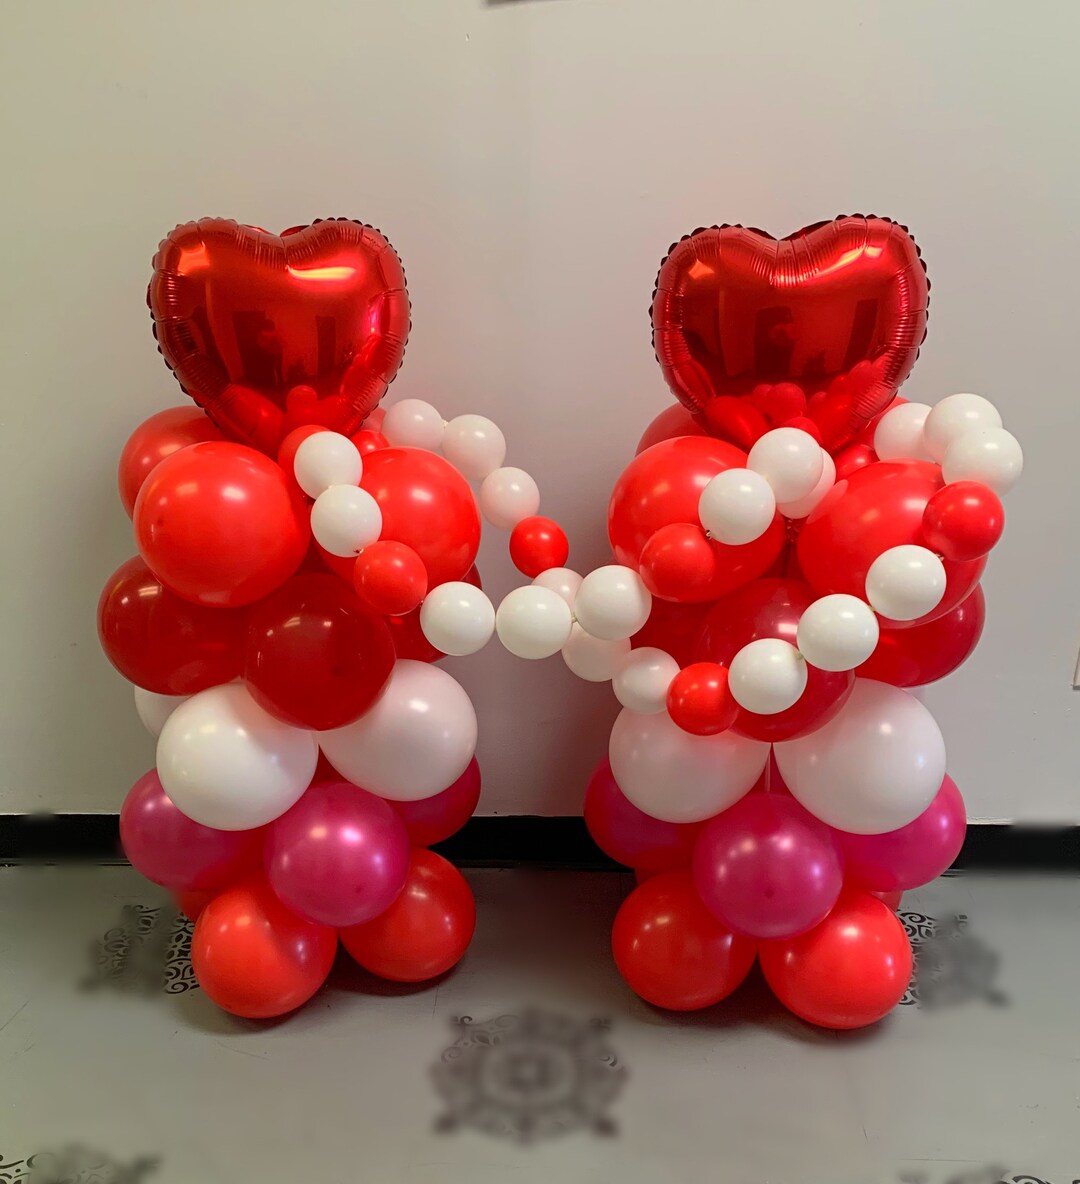 Minnie Mouse Birthday Decoration Makes 2 Balloon columns for party or Gift  kit, No helium or balloon stands needed, instructions included.